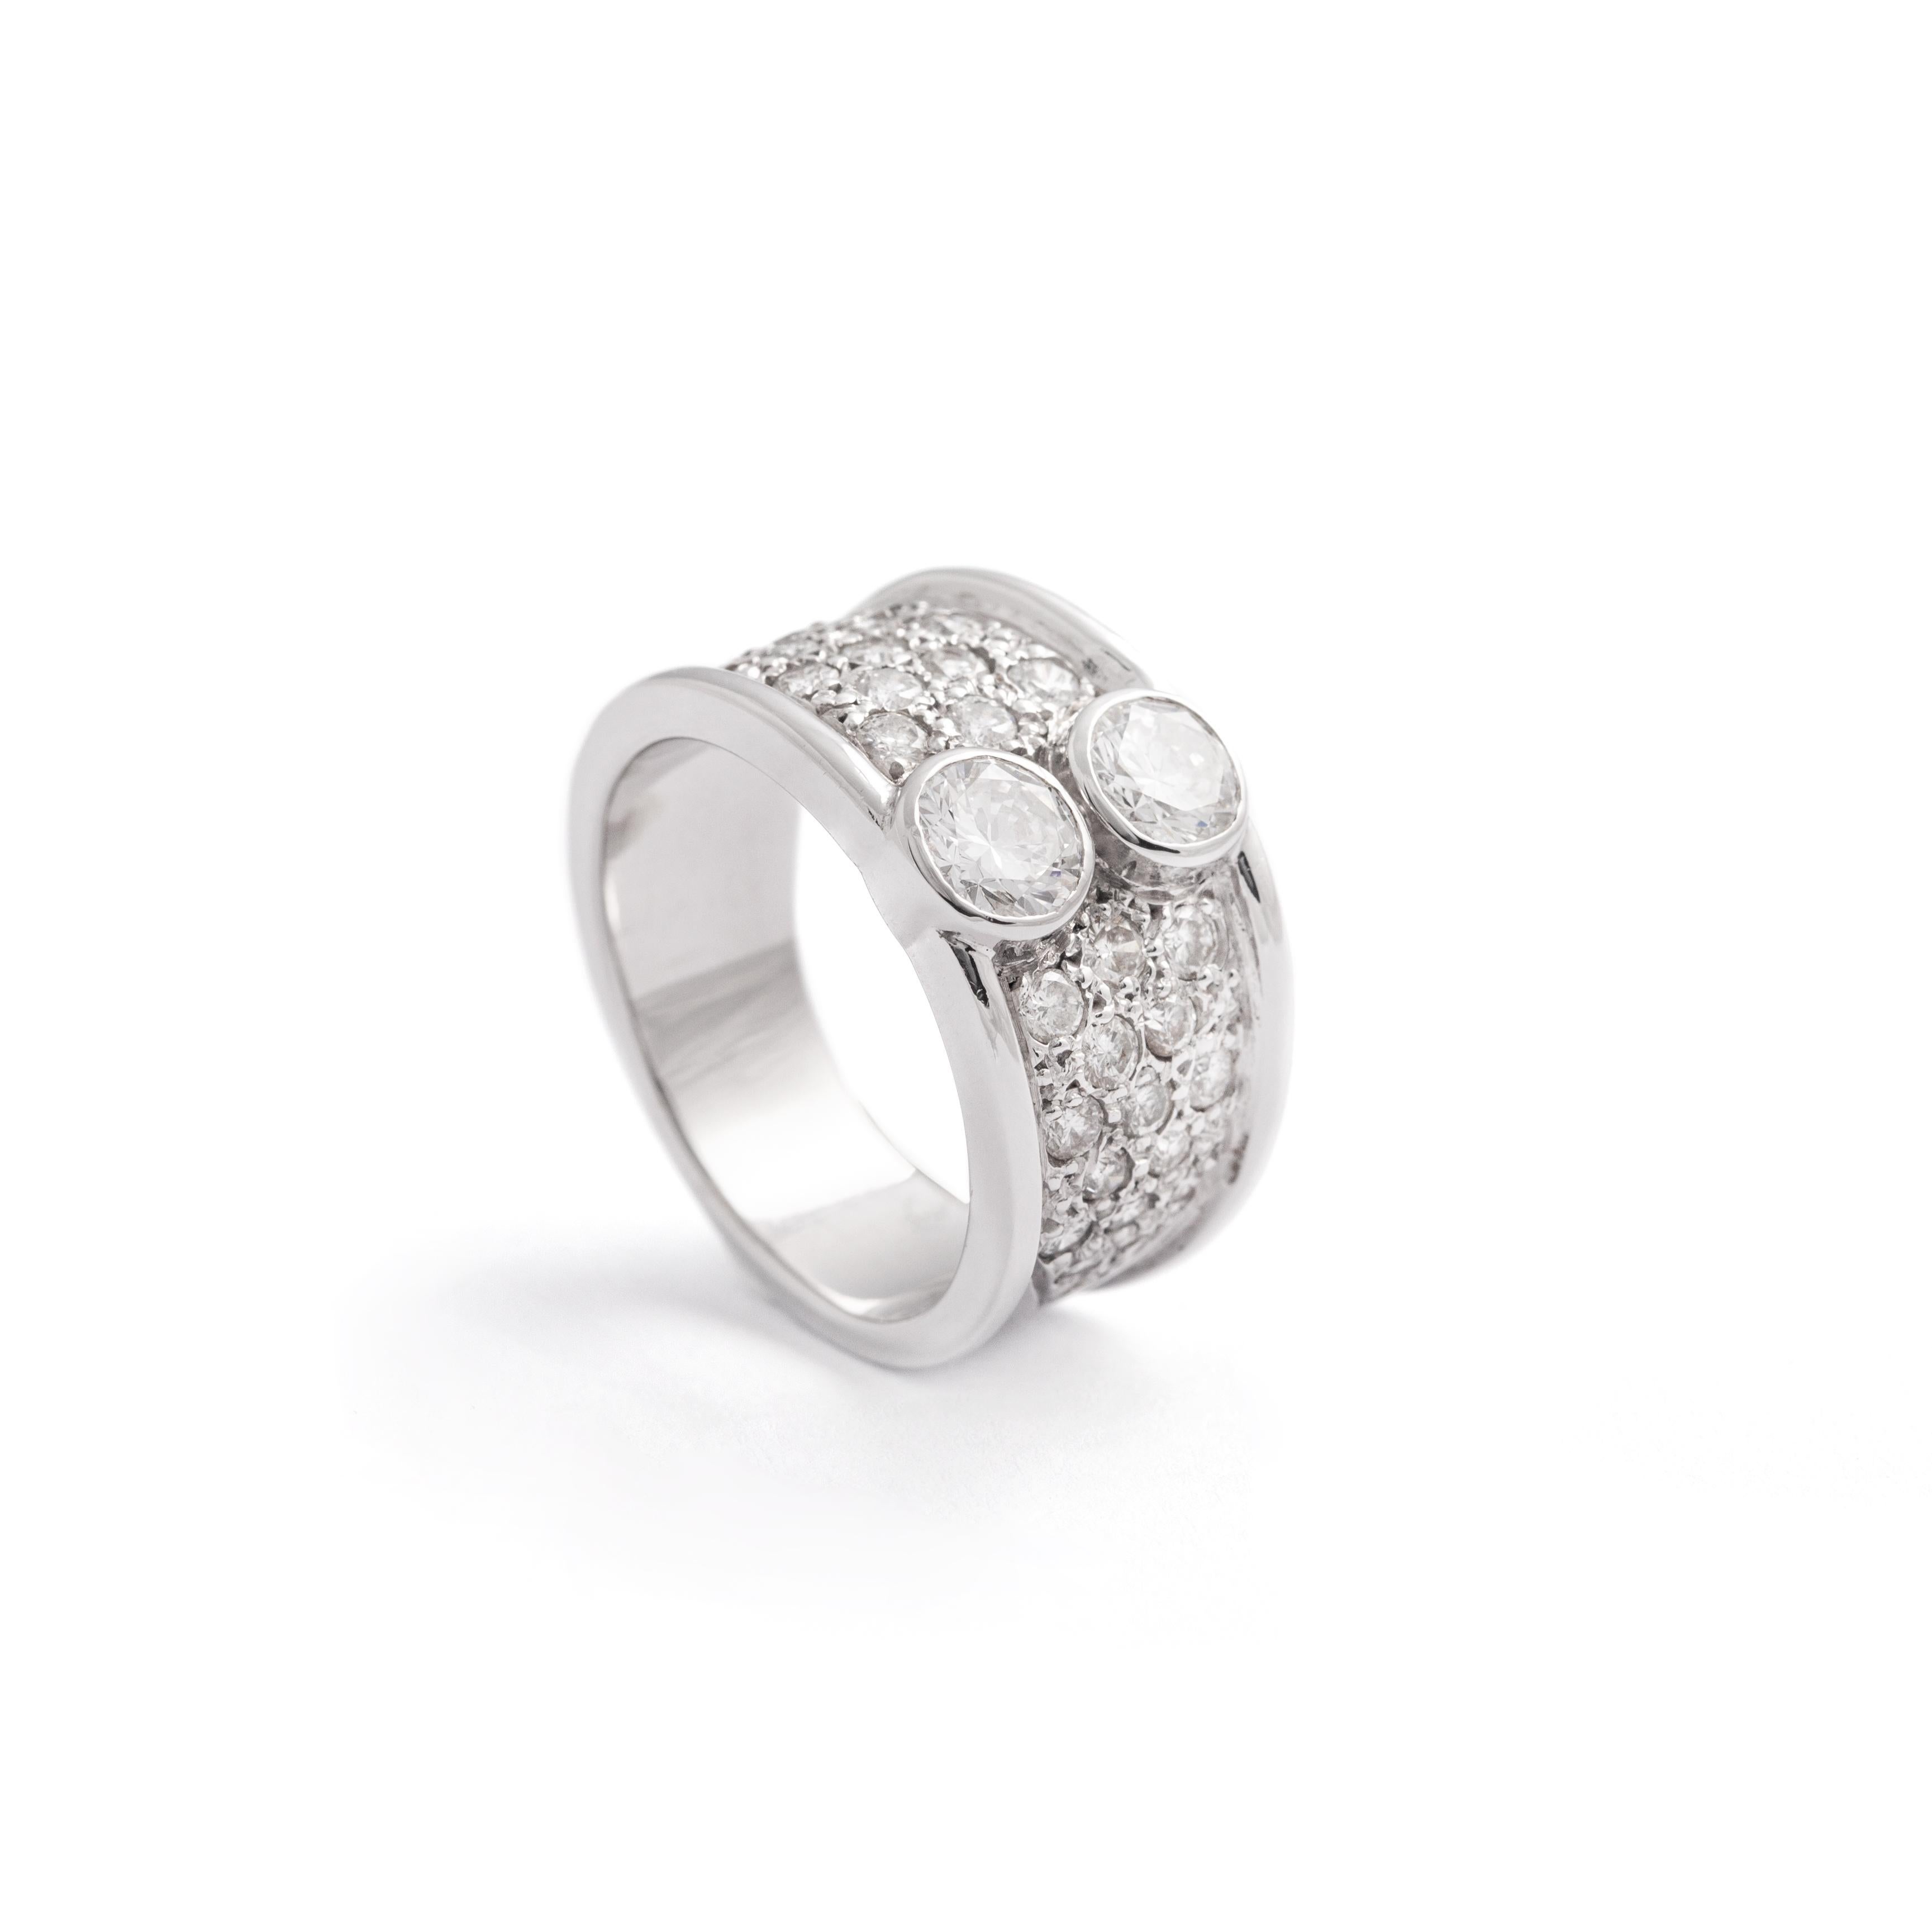 Diamond White Gold 18K Ring.
Ring Width: 0.60 centimeters up to 1.10 centimeters.
Size: 55.
Total weight: 11.66 grams.
